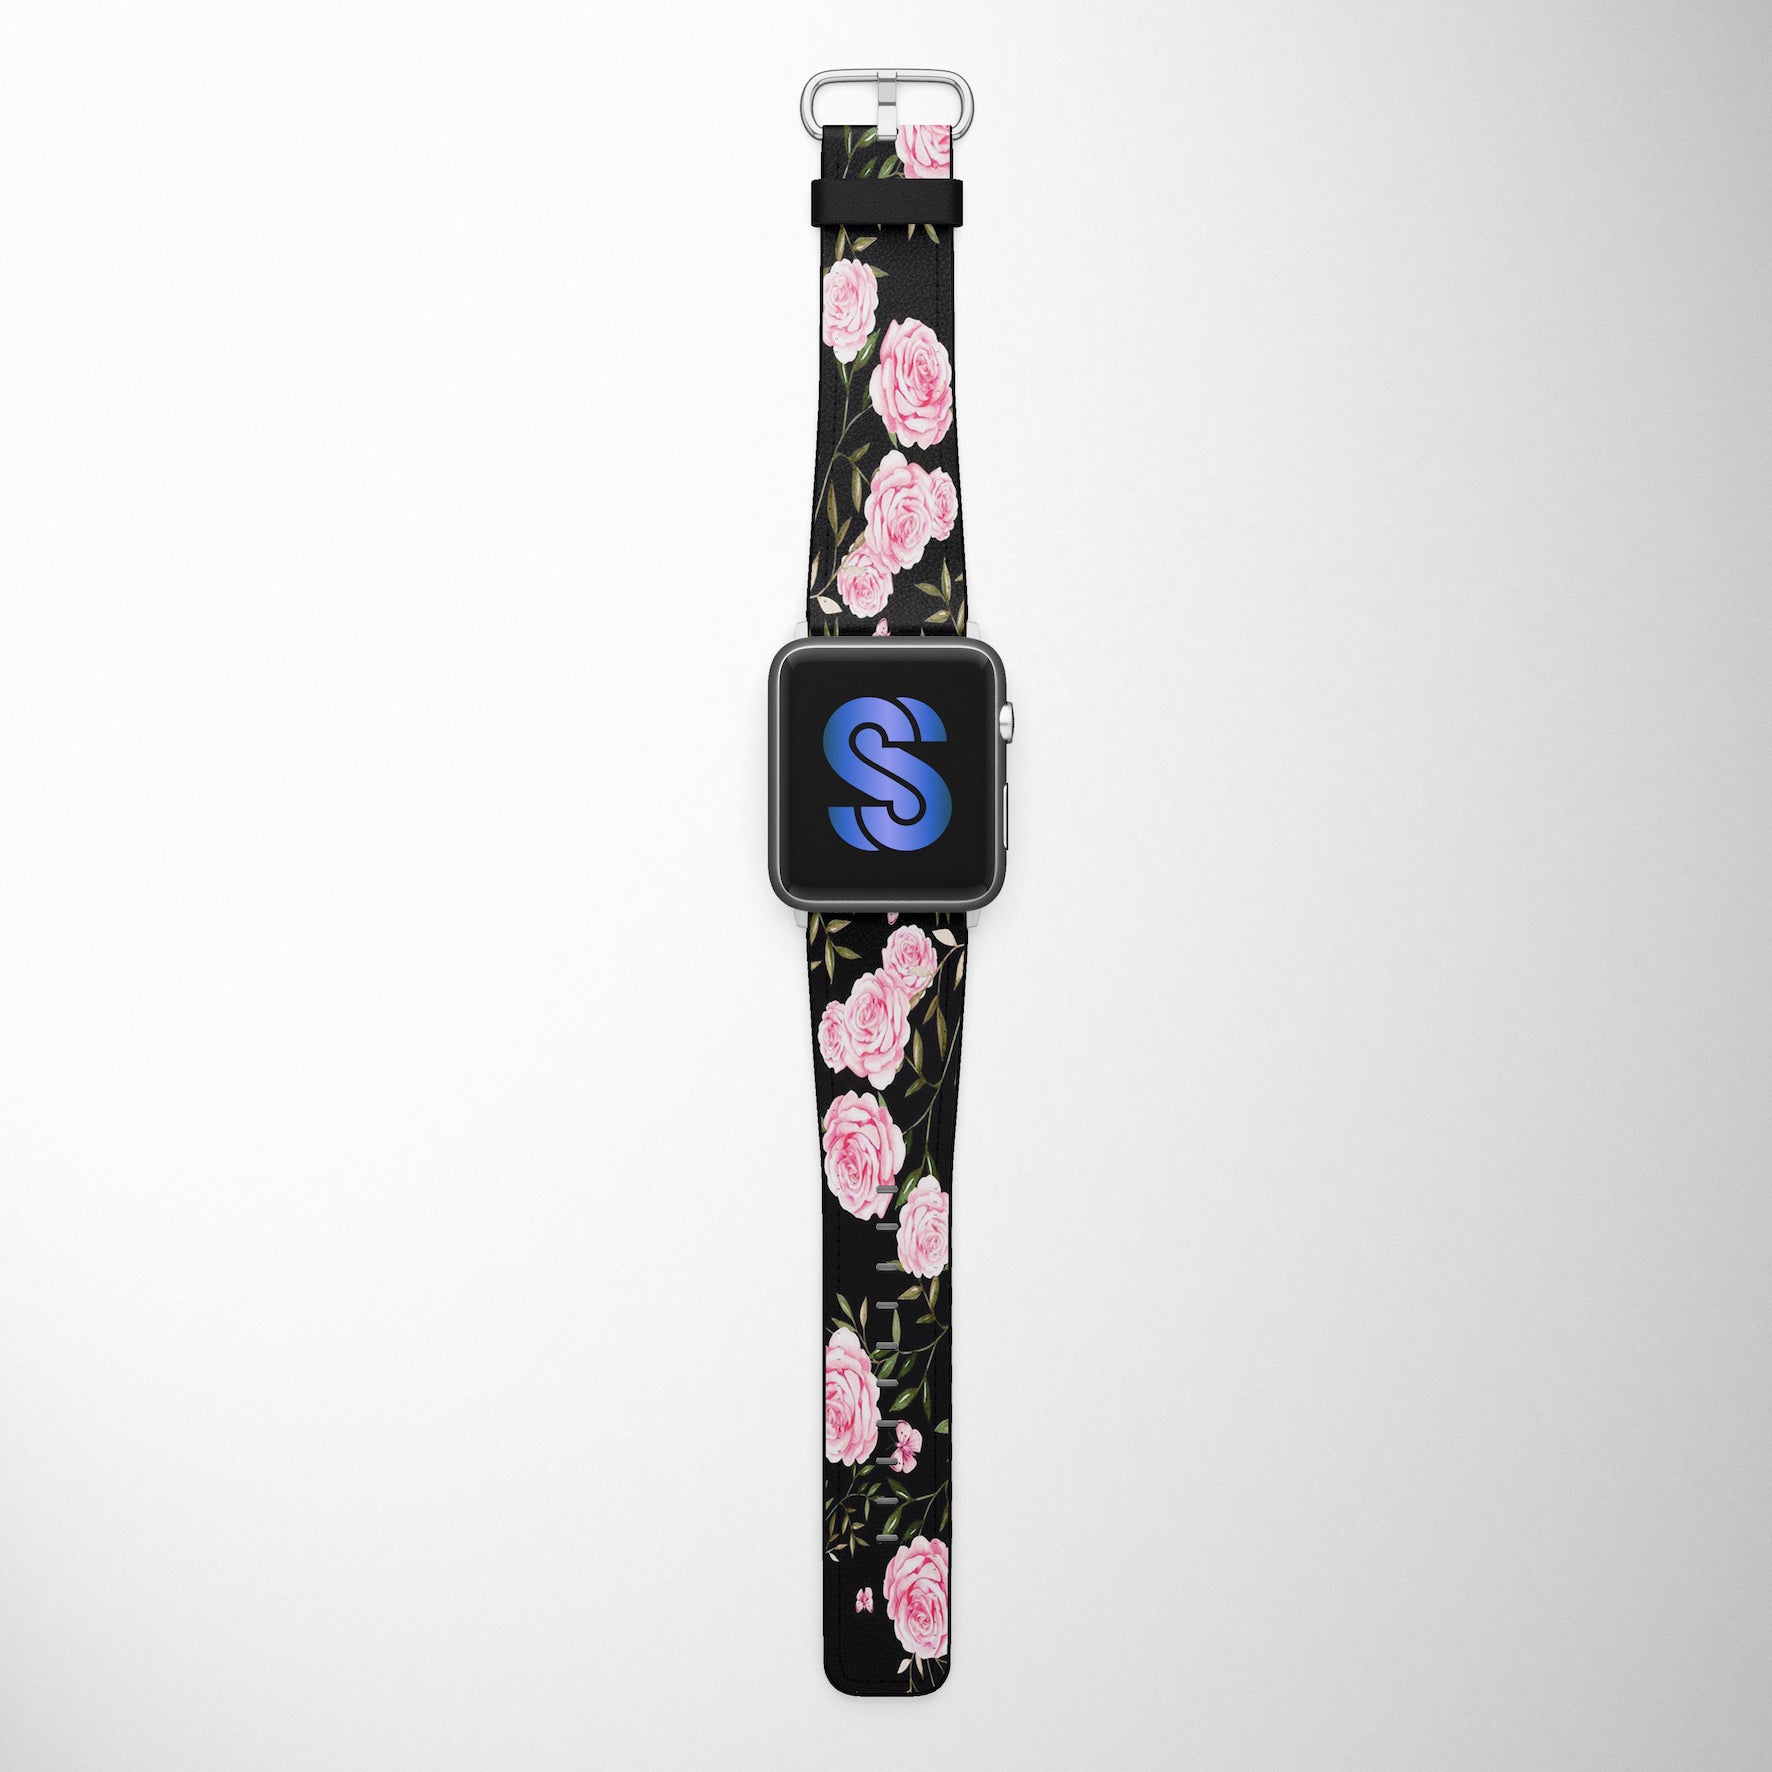 Pink Roses Faux Leather Apple Watch Band for Apple Watch 1,2,3,4,5,6,SE - www.scottsy.com